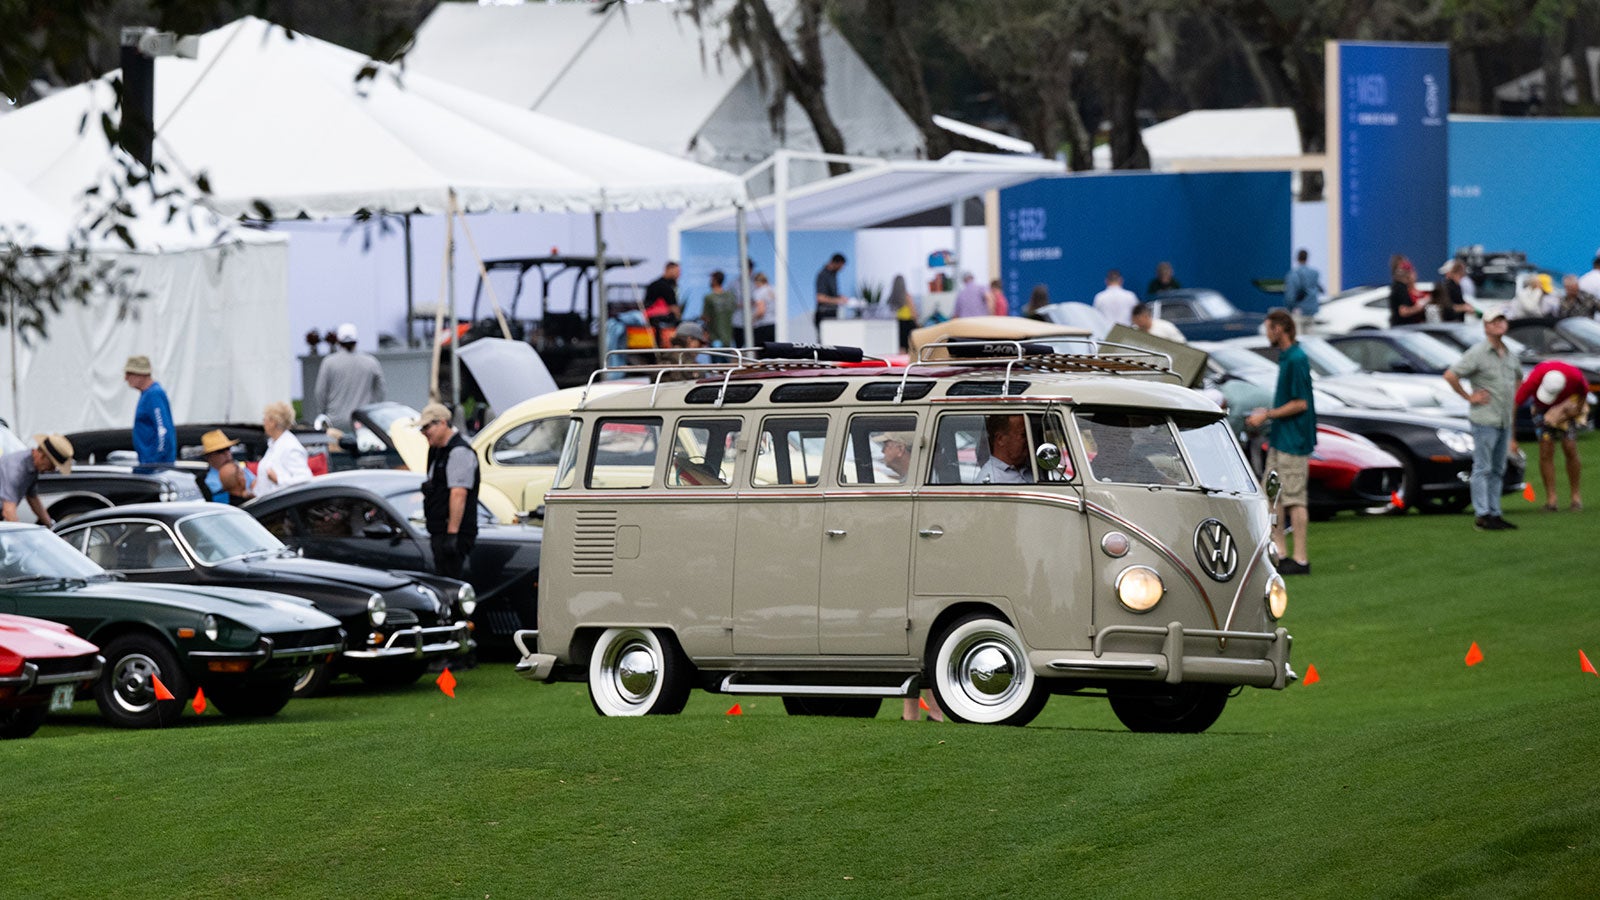 Just a Bunch of Lovely Old Volkswagen Buses to Enjoy